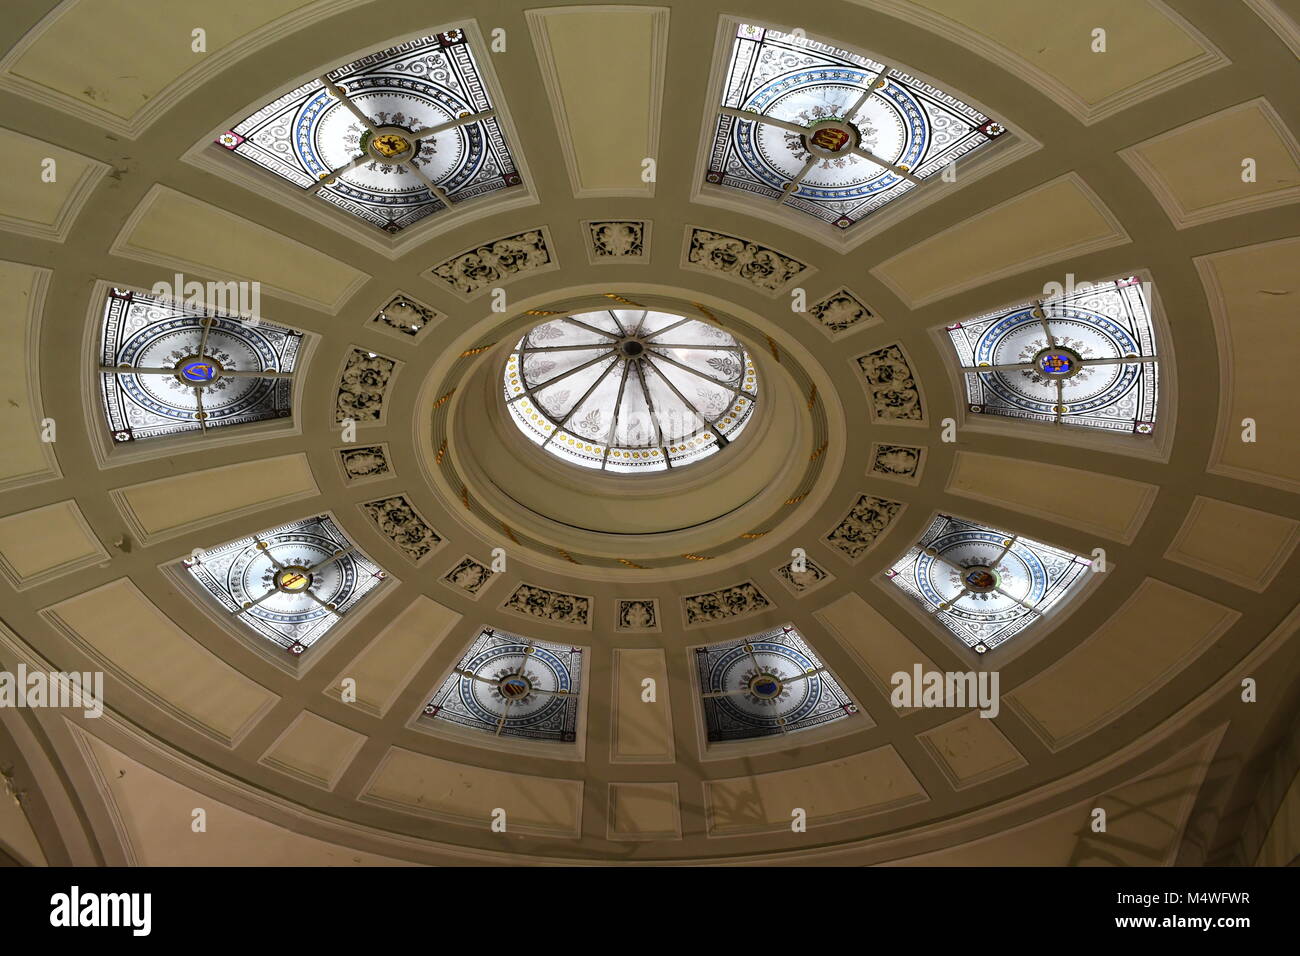 Ceiling dome in the Portico Library in Manchester UK Stock Photo